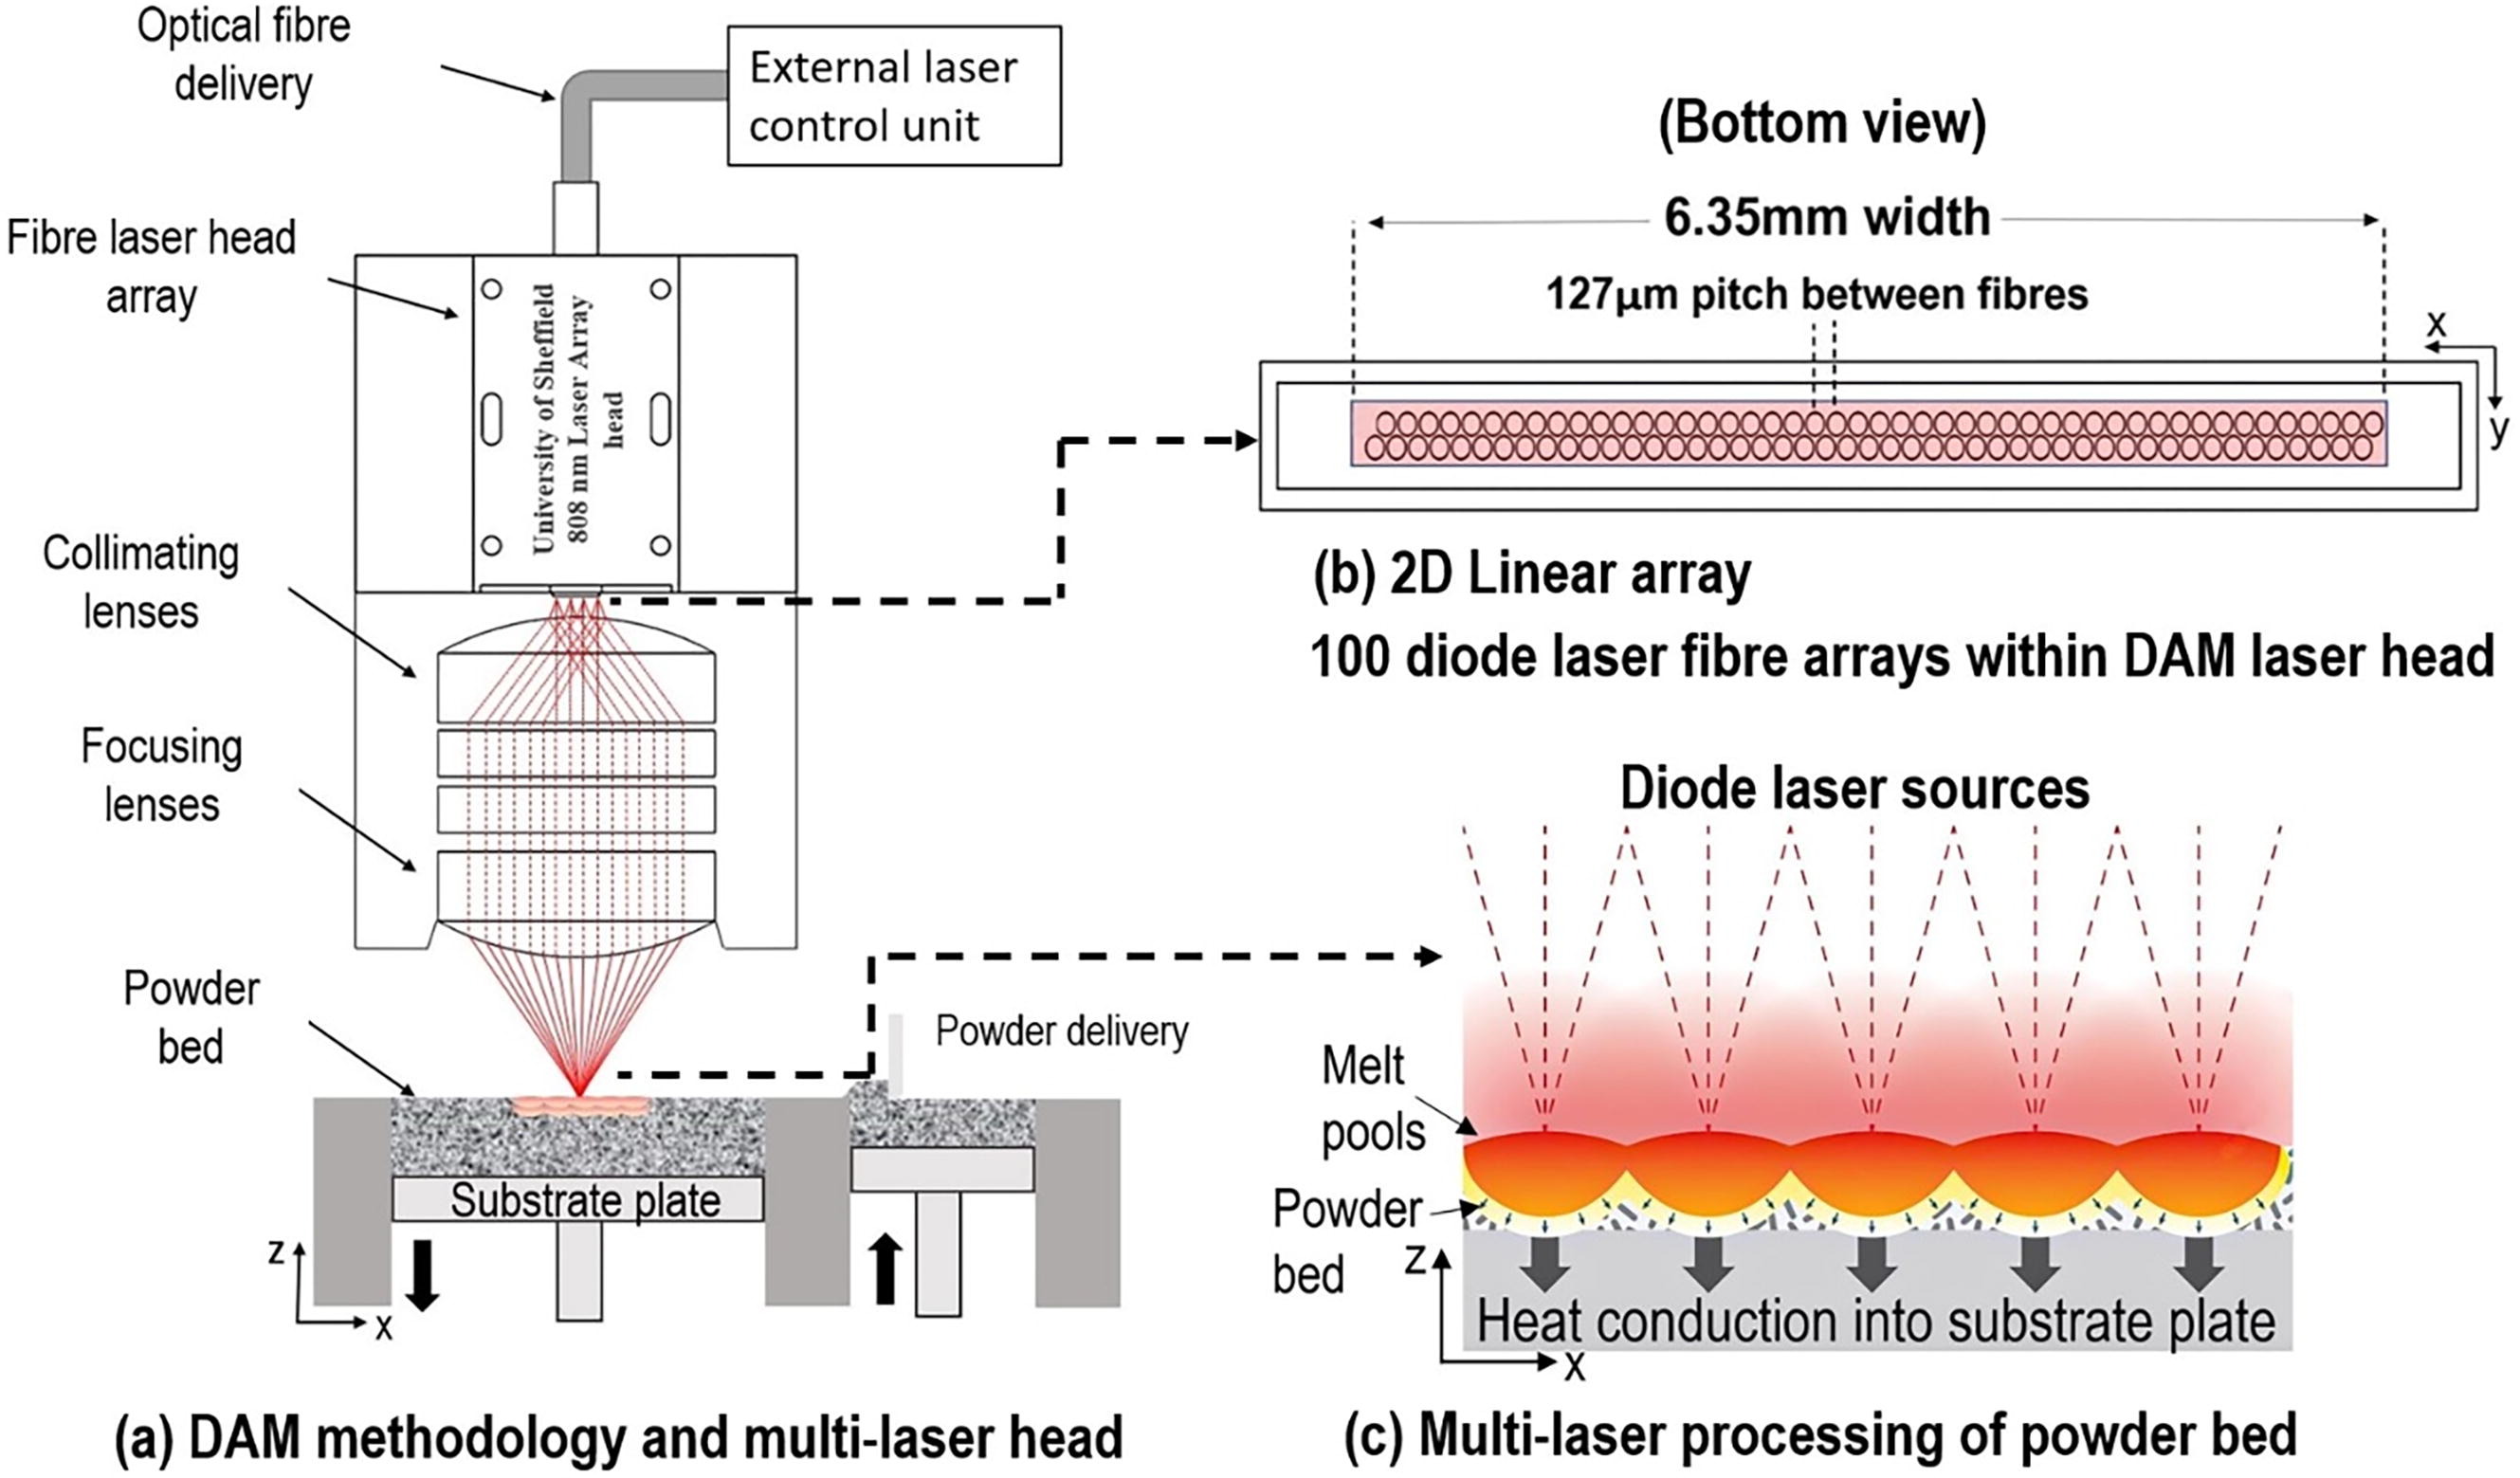 A multi-laser approach with the potential to overcome traditional laser powder bed fusion processing challenges